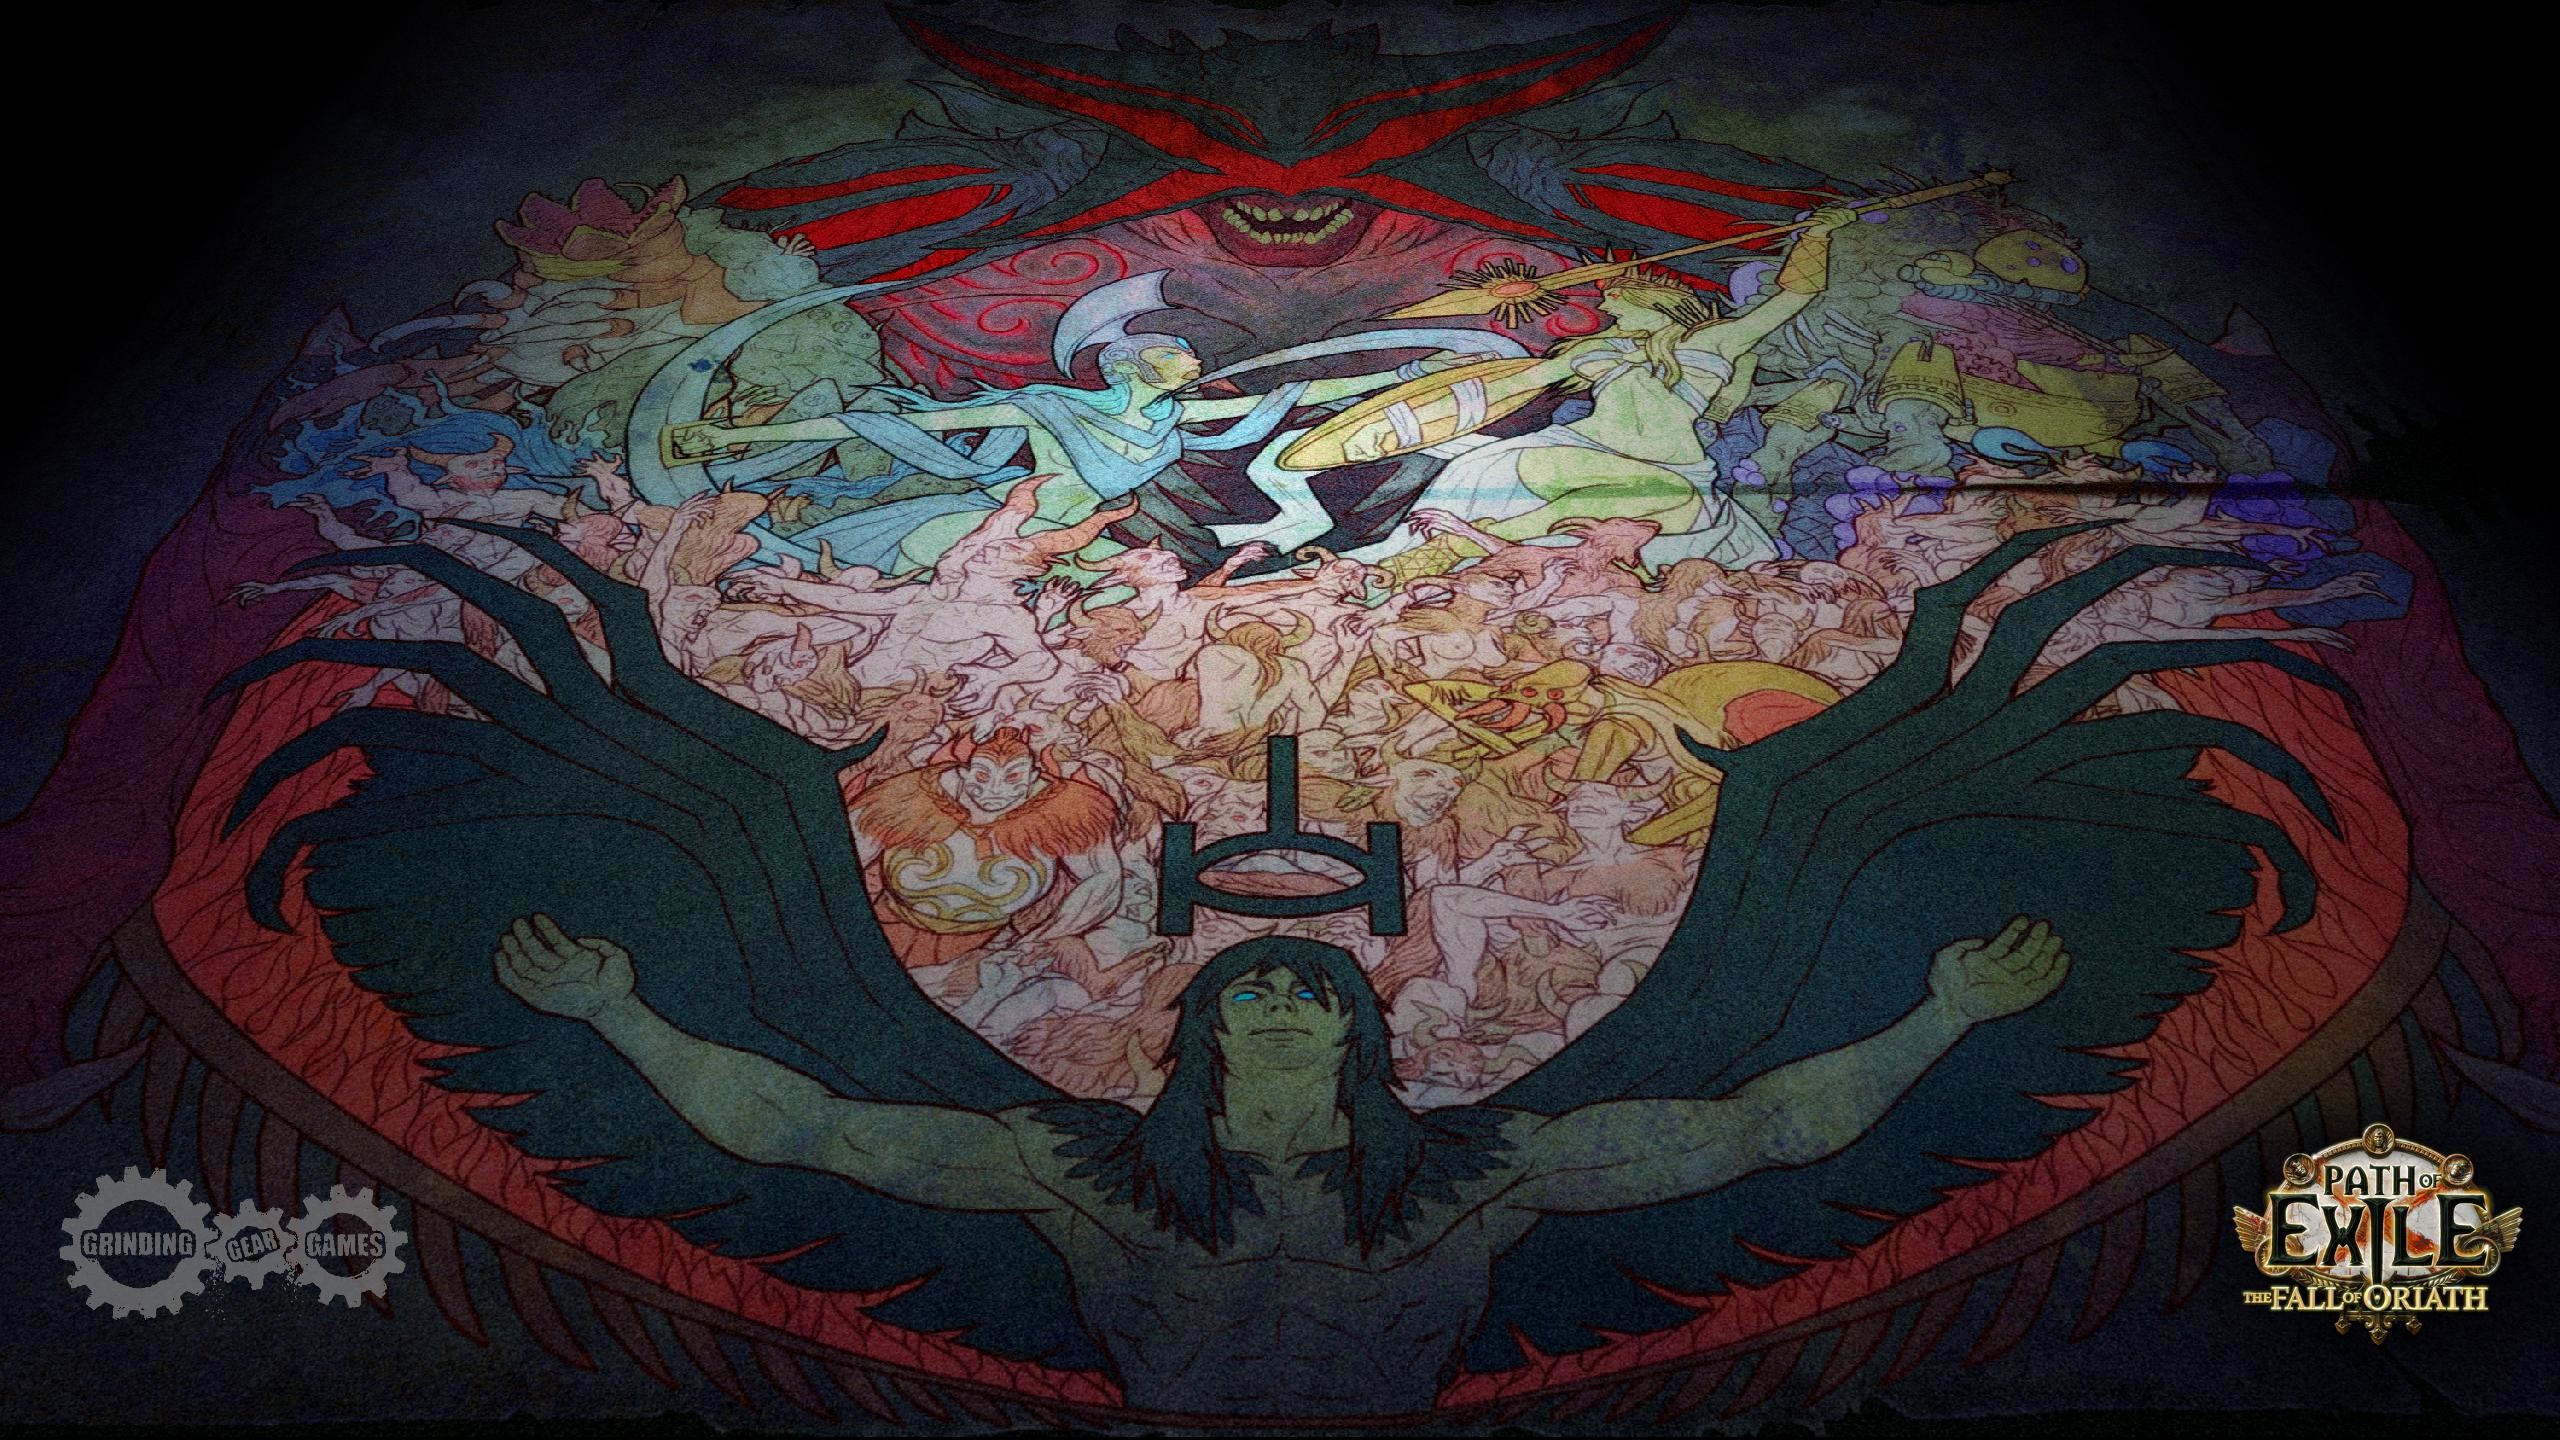 path of exile wallpaper 1920x1080,art,illustration,psychedelic art,visual arts,fictional character